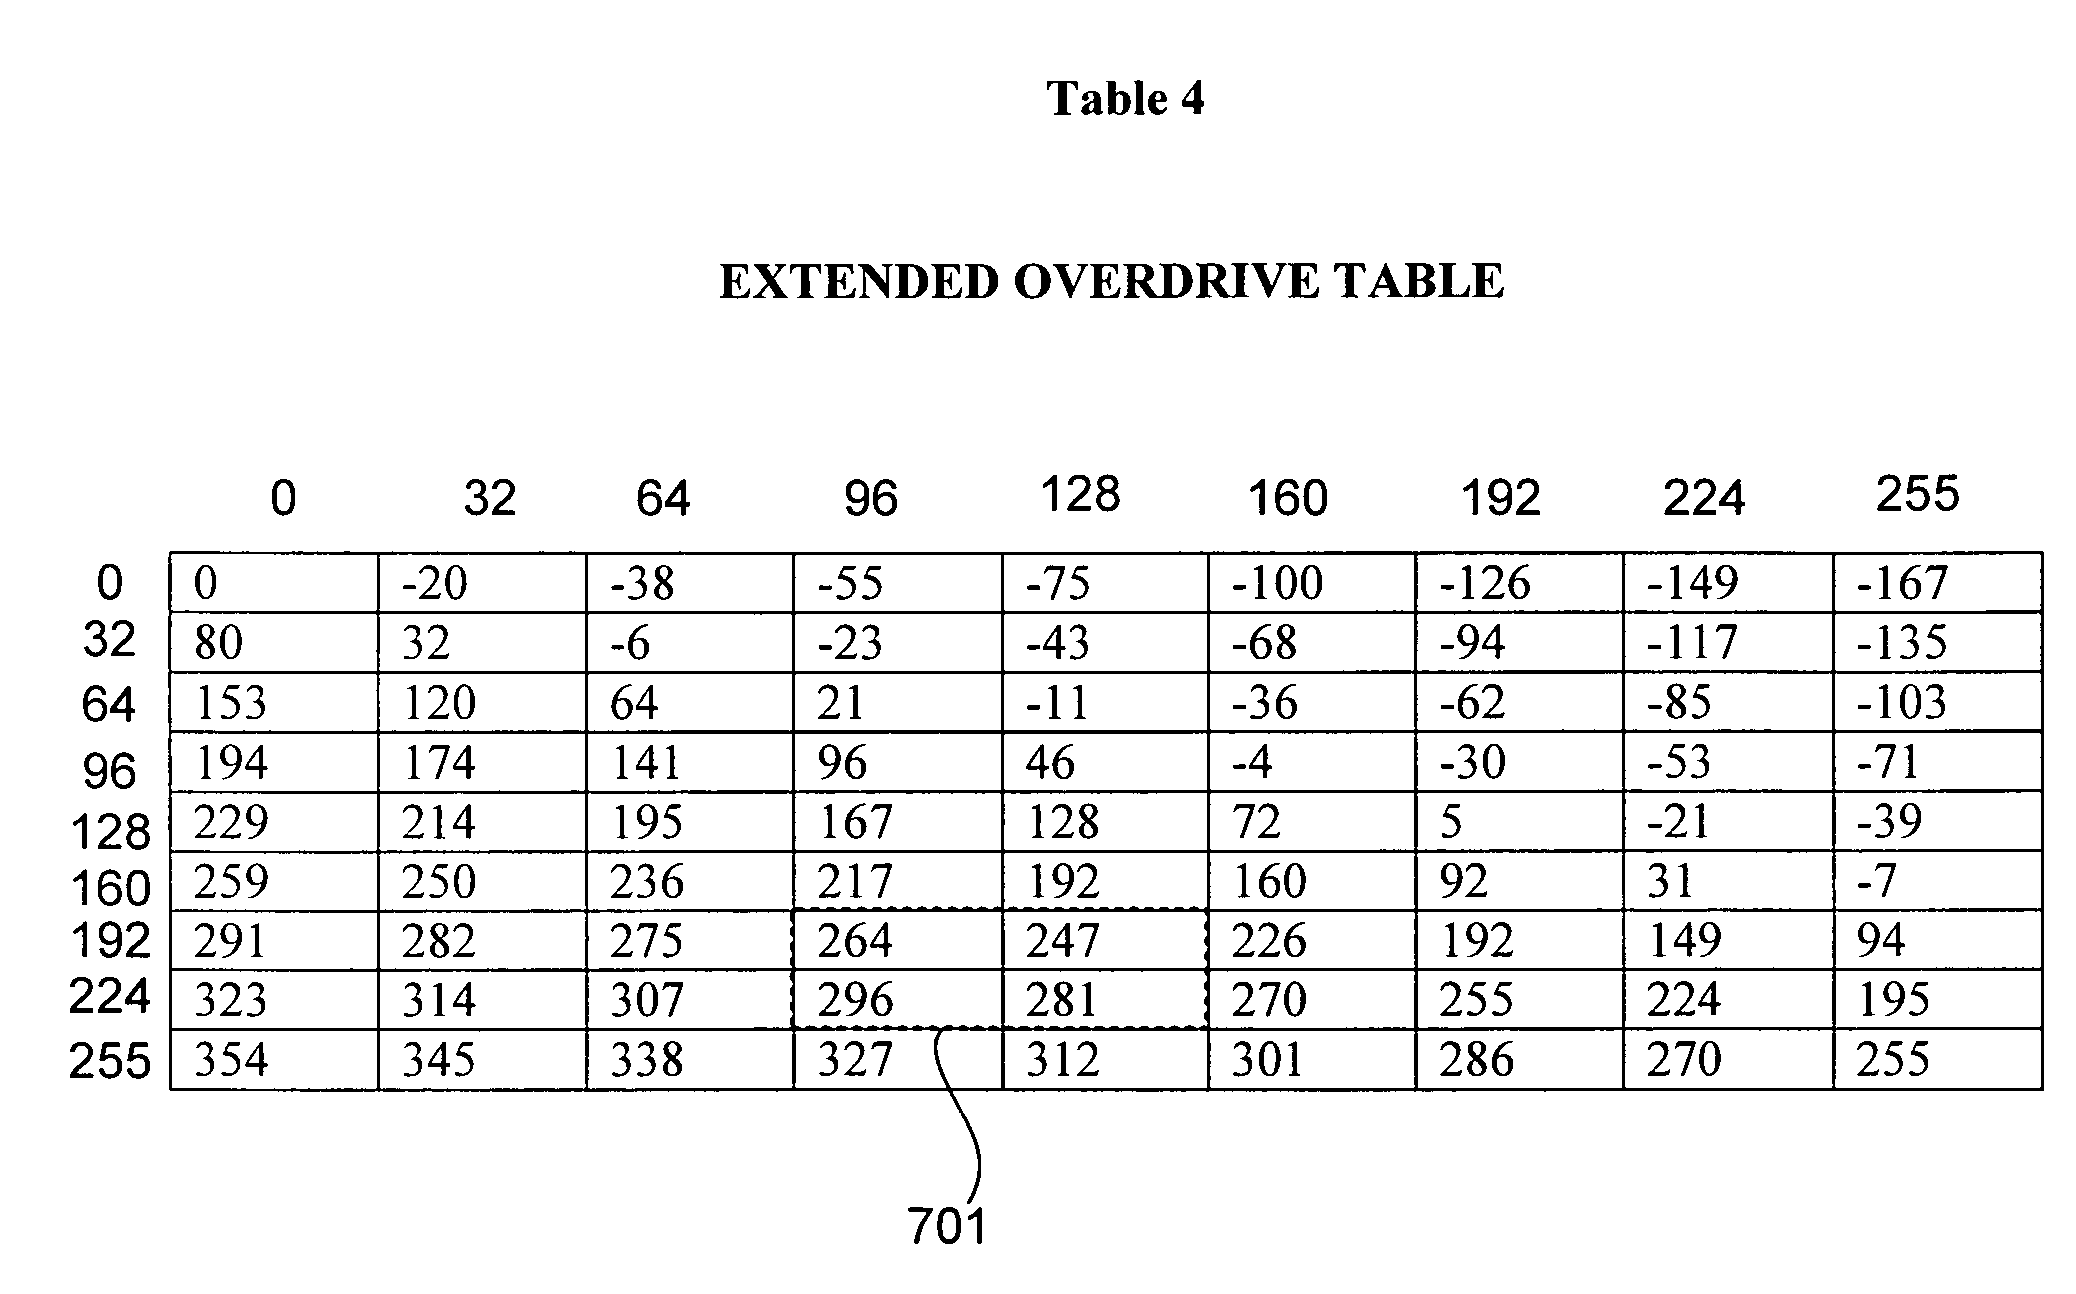 Extended overdrive table and methods of use thereof for enhancing the appearance of motion on an LCD panel